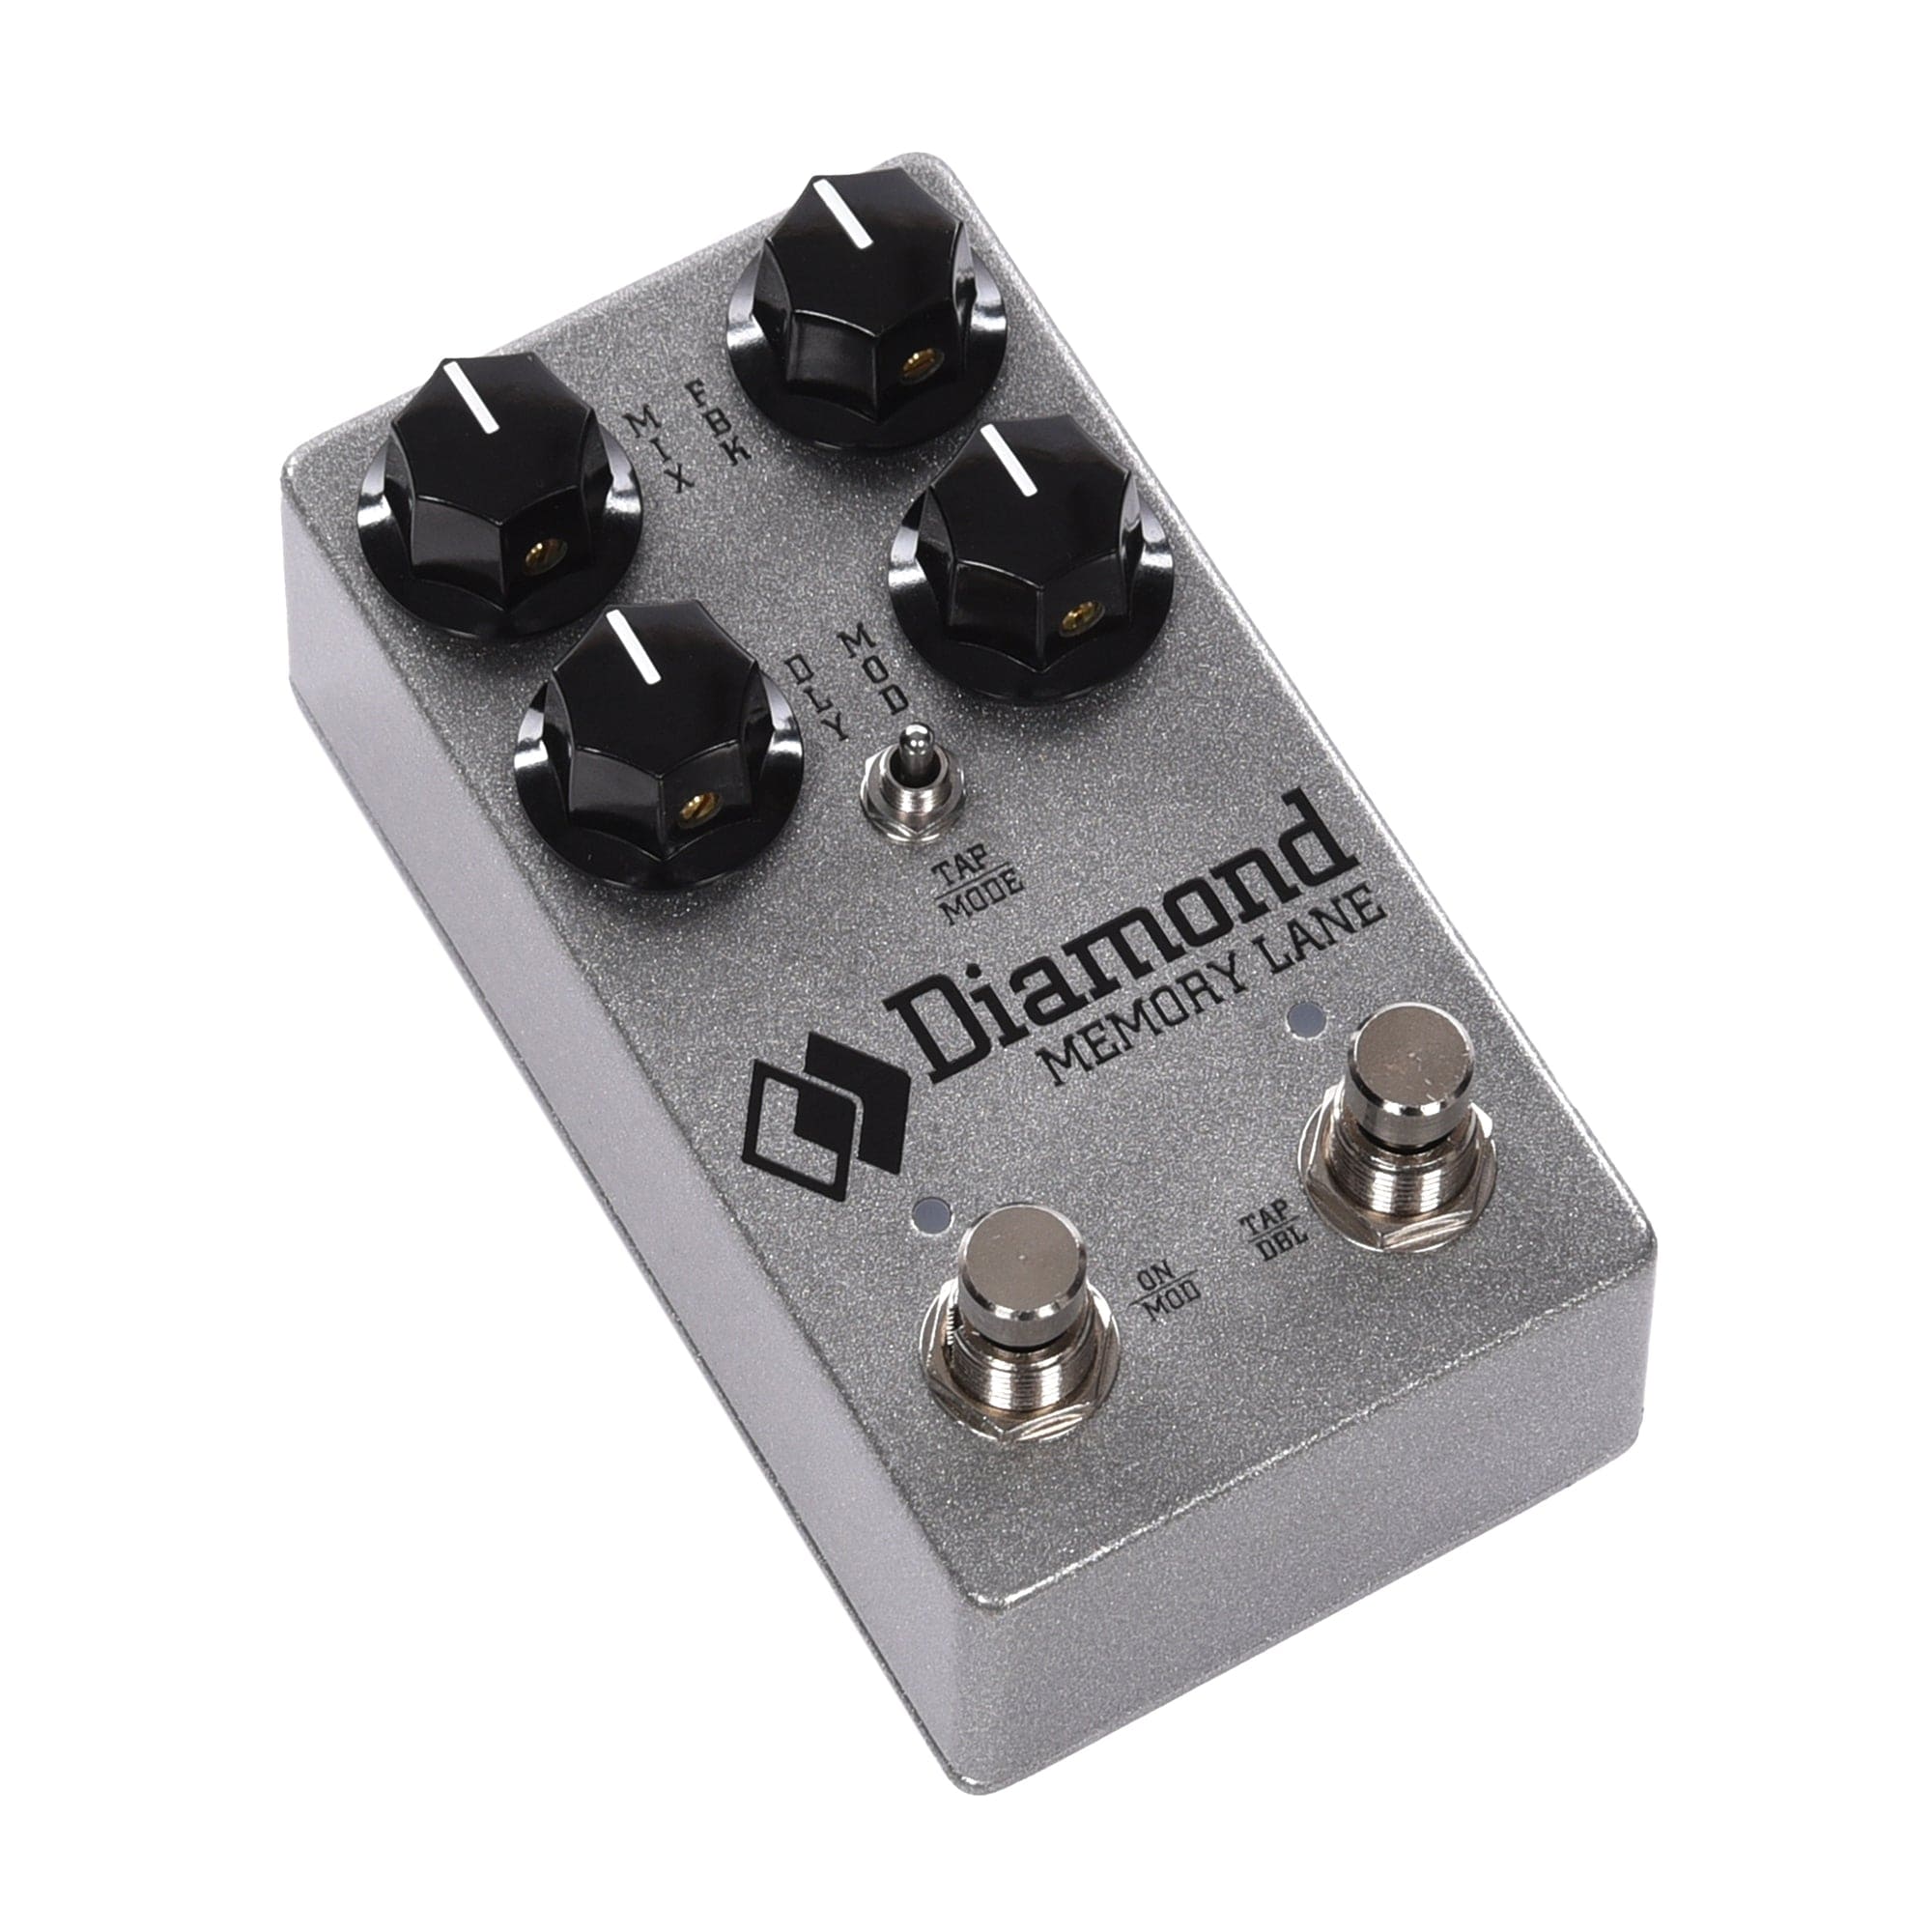 Diamond Pedals Memory Lane Delay Pedal Effects and Pedals / Delay